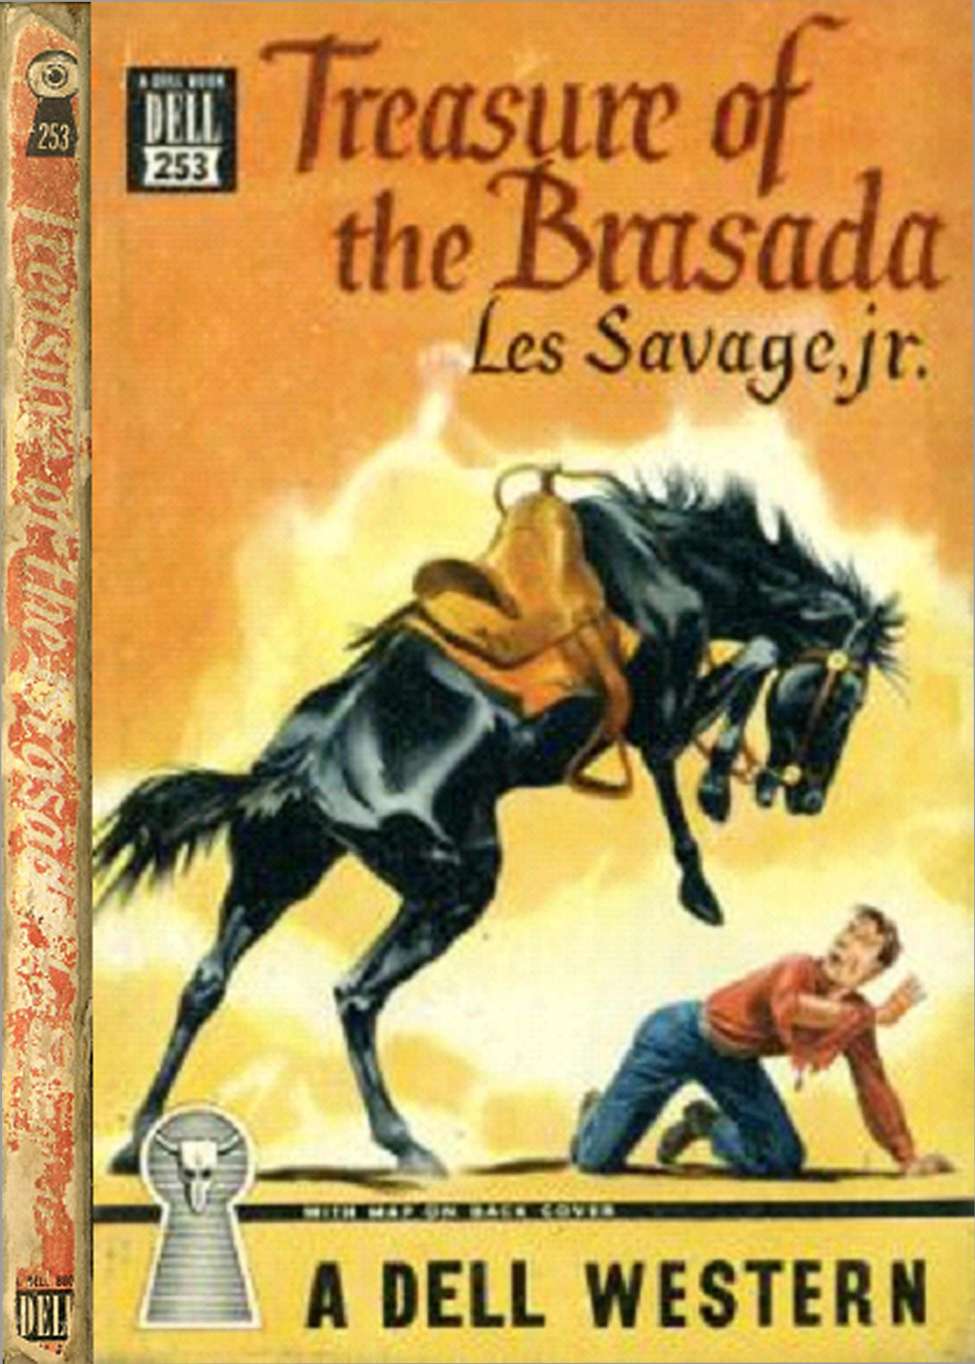 Comic Book Cover For Treasure of the Brasada by Les Savage Jr.